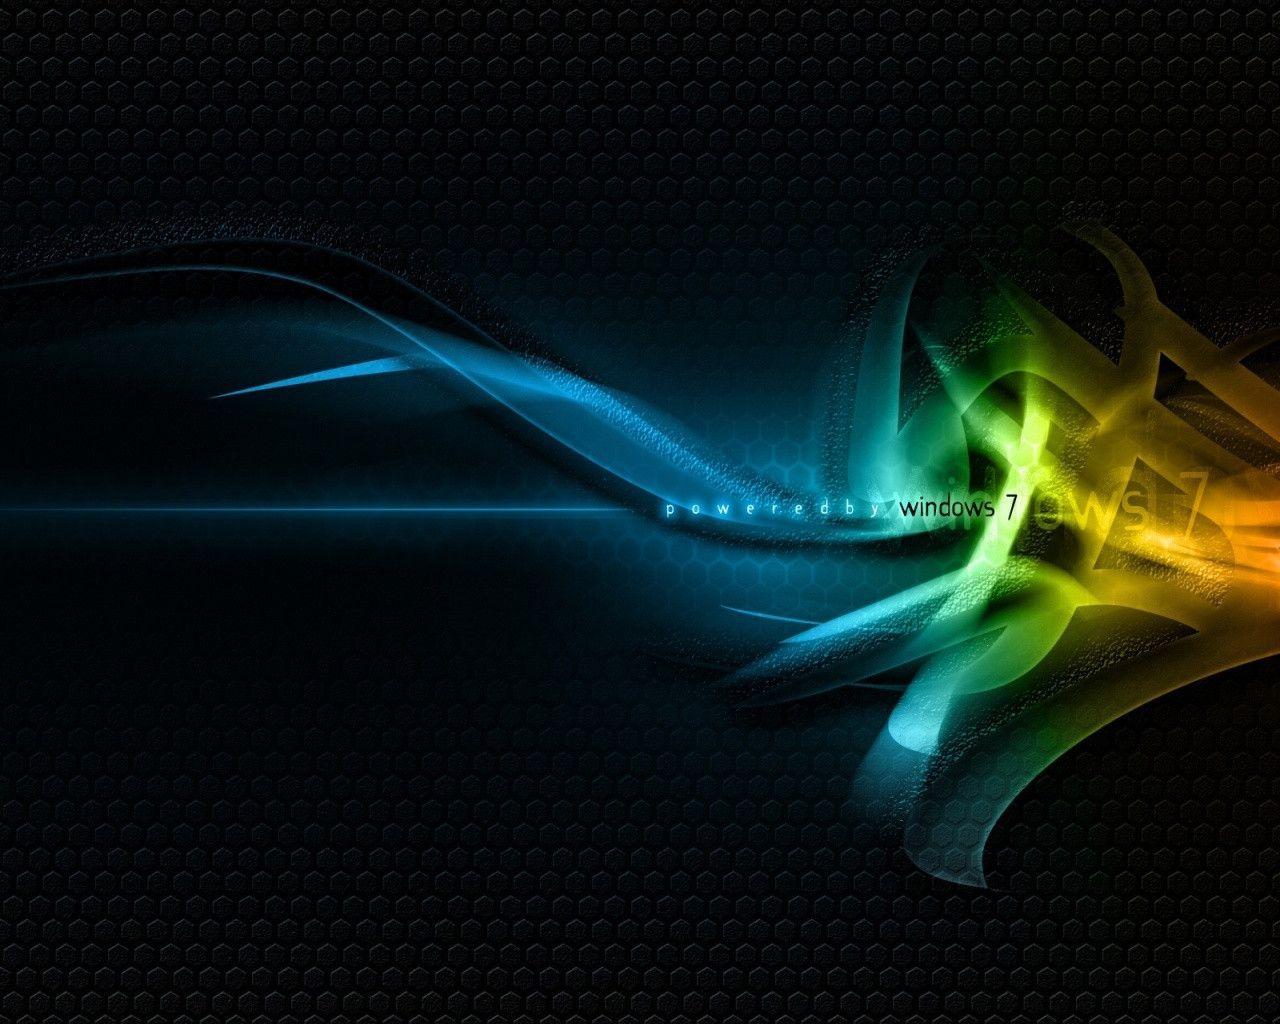 Wallpaper For > 3D Wallpaper For Pc Windows 7 Free Download